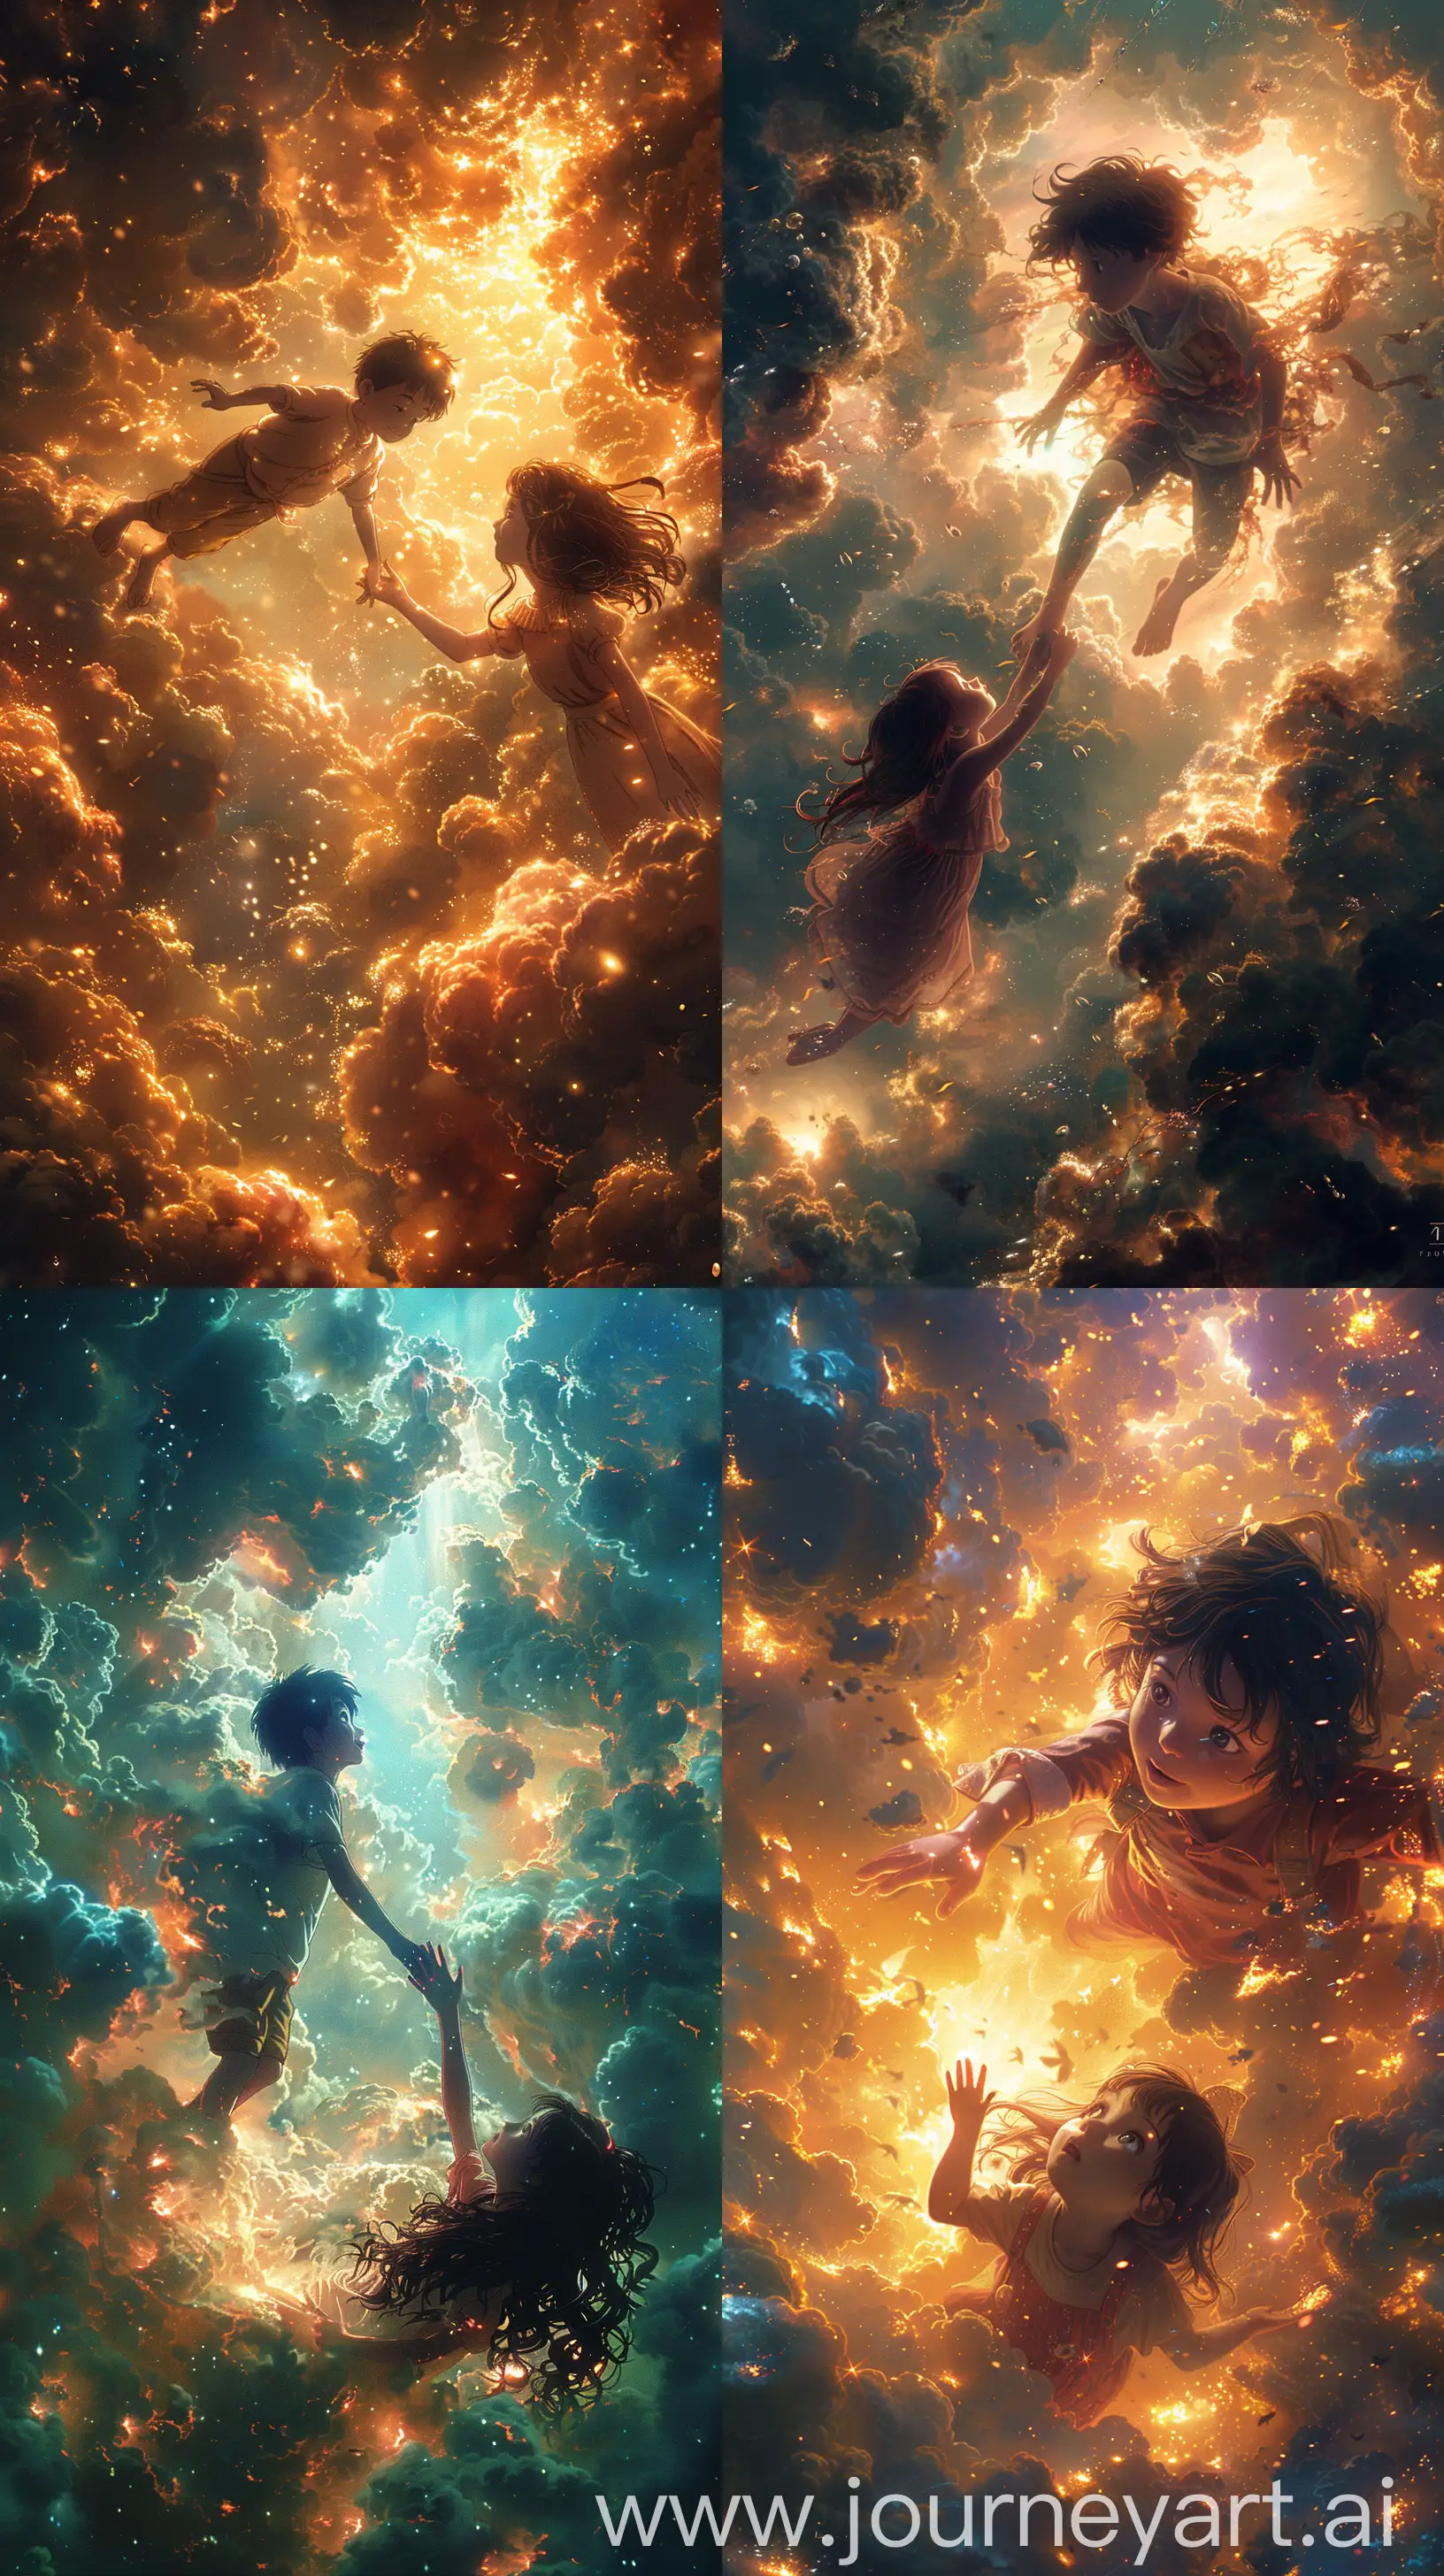 !mj1 Ghibli Studio inspired scene, a young boy falling through a sky filled with luminescent, billowing clouds, a girl reaching out to grasp his hand amidst the ethereal softness, vivid and bright, exquisitely detailed characters with expressive faces, high resolution 8k, well-managed proportions, full portrait --ar 9:16 --stylize 750 --v 6